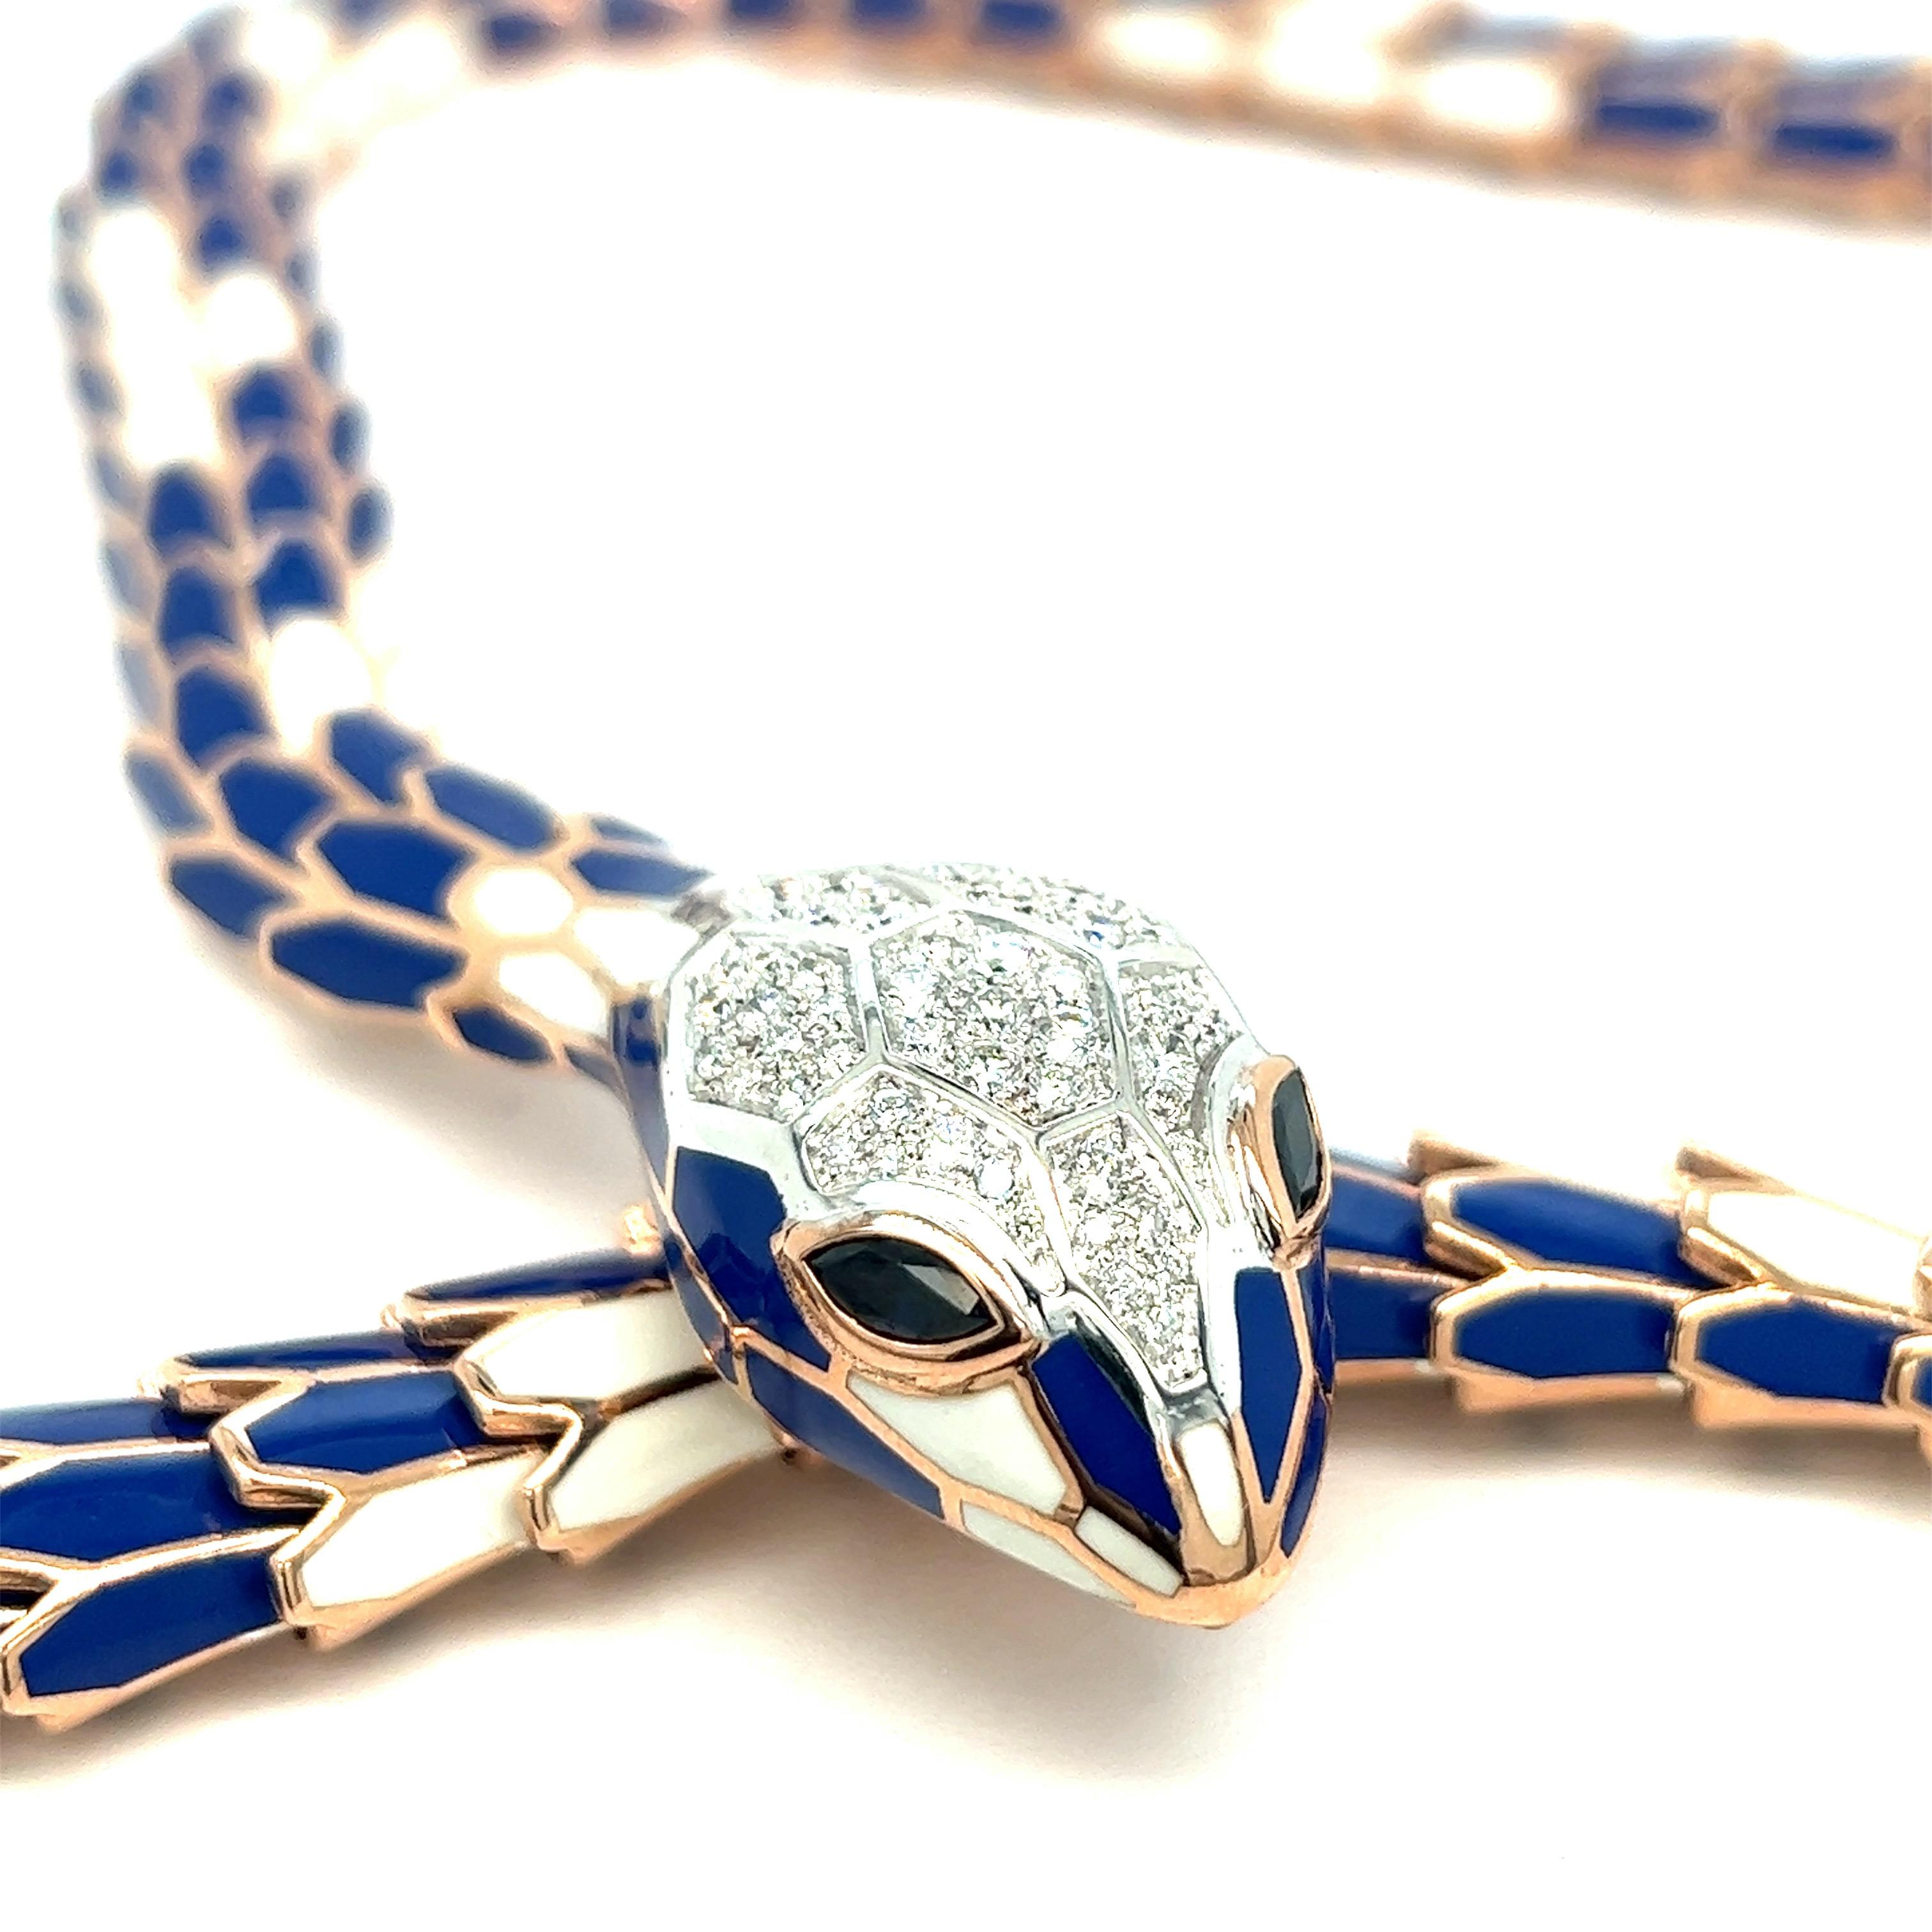 Blue and white enamel diamond sapphire snake necklace

Round-cut diamonds of 1.20 carats, Marquise-shaped sapphires of 0.56 carat, 18 karat white gold, and silver with a tone of rose gold; marked 750, 925, D. 1.20, S. 0.56, N004RM20M01-0111

Size: